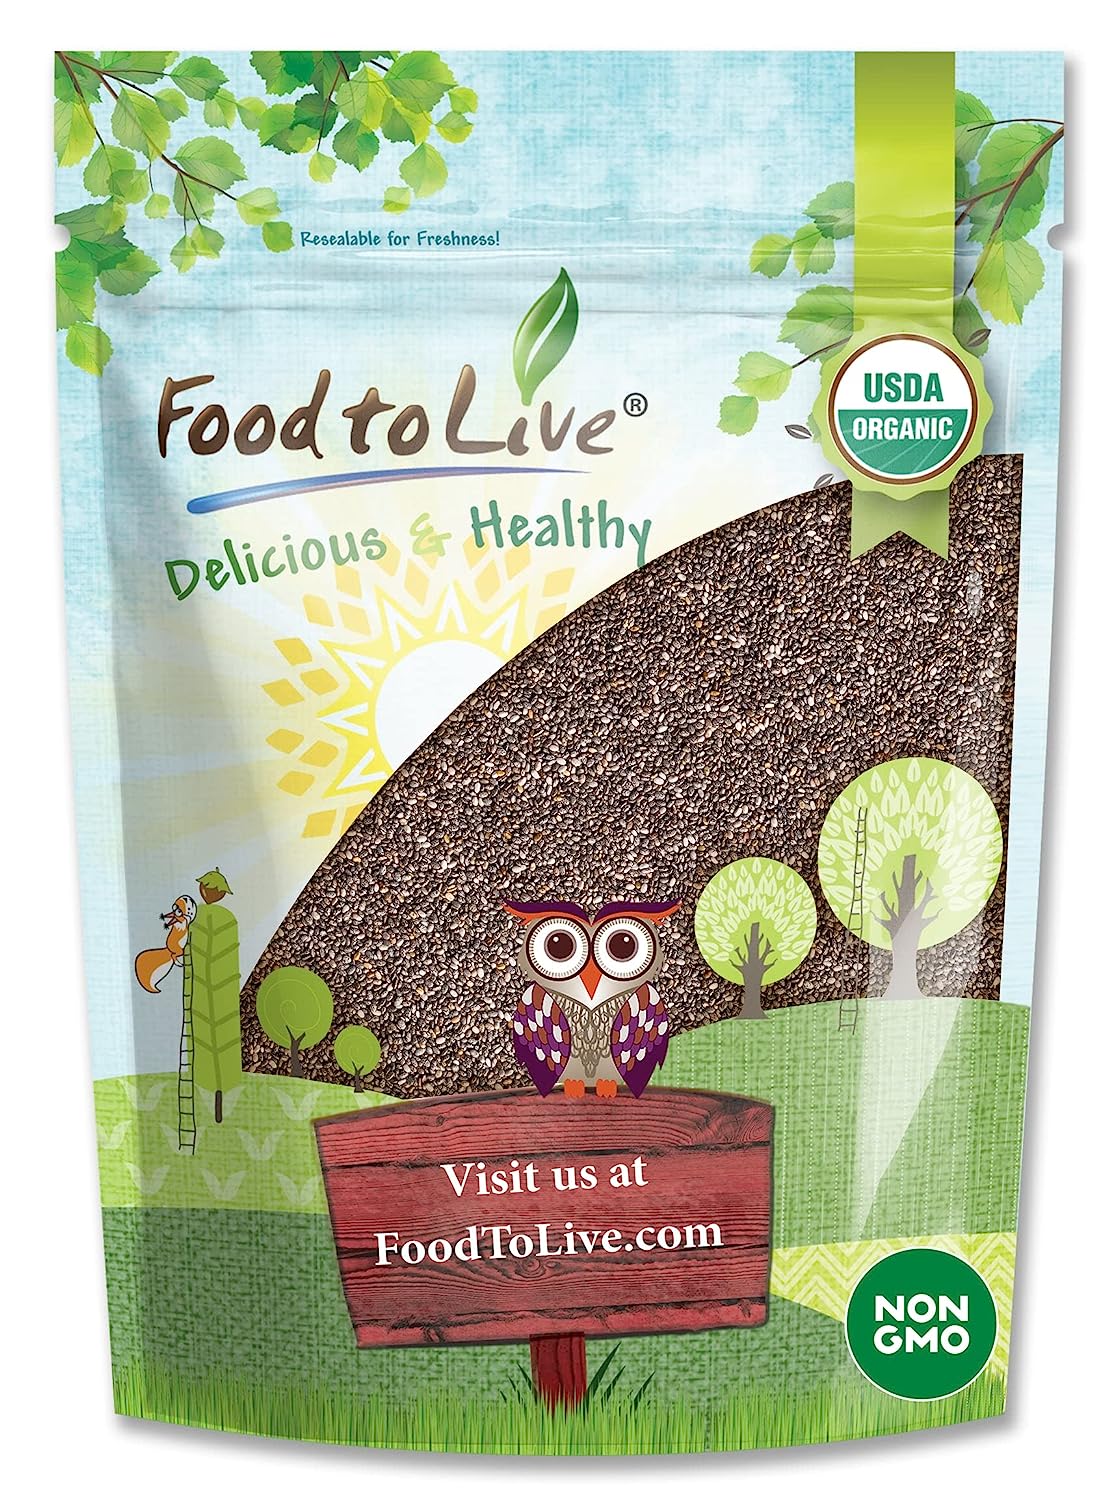 Organic Black Chia Seeds– Non-GMO, Whole, Sproutable, Vegan, Kosher, Keto, Sirtfood, Bulk. Rich in Essential Fatty Acids, Fiber, Protein. Great For Chia Pudding, Smoothie, Oatmeal